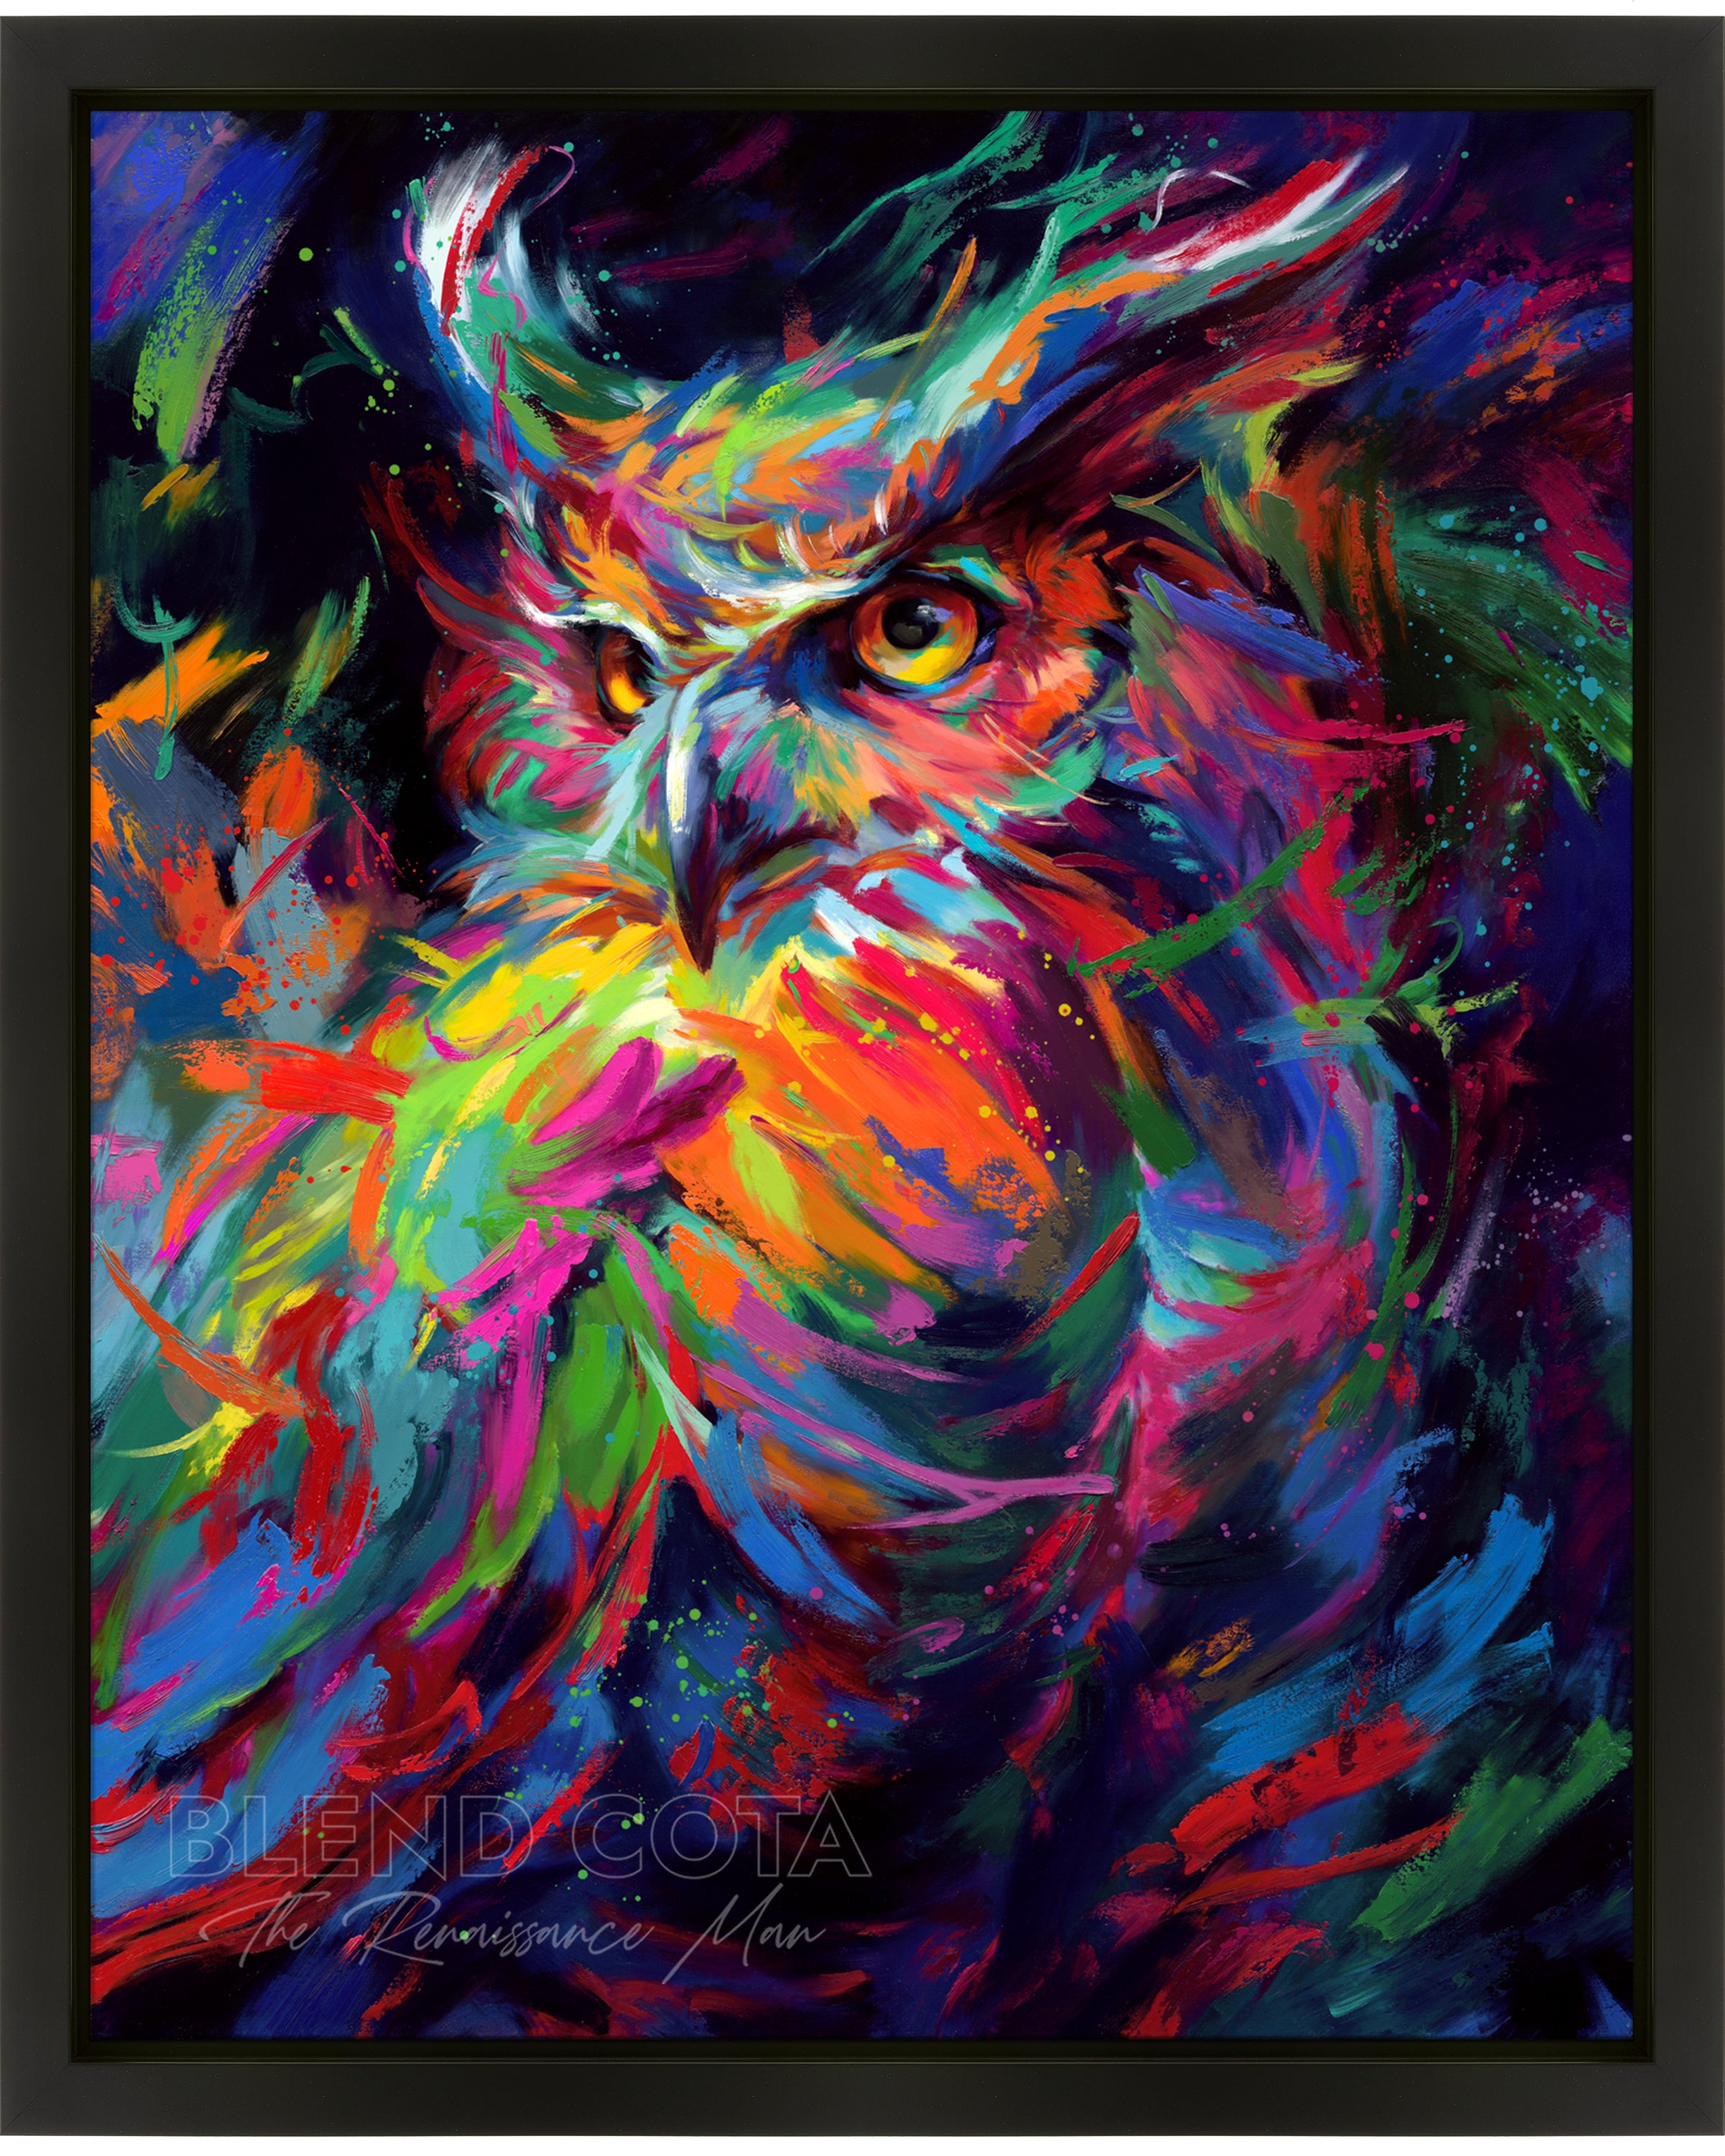 Oil on canvas original painting in black frame of blue, green and orange owl in the night sky, symbol of wisdom and knowledge, and represented with Athena of Greece and Minerva of Rome, piercing gaze of great horned owl in colorful brushstrokes, color expressionism style.